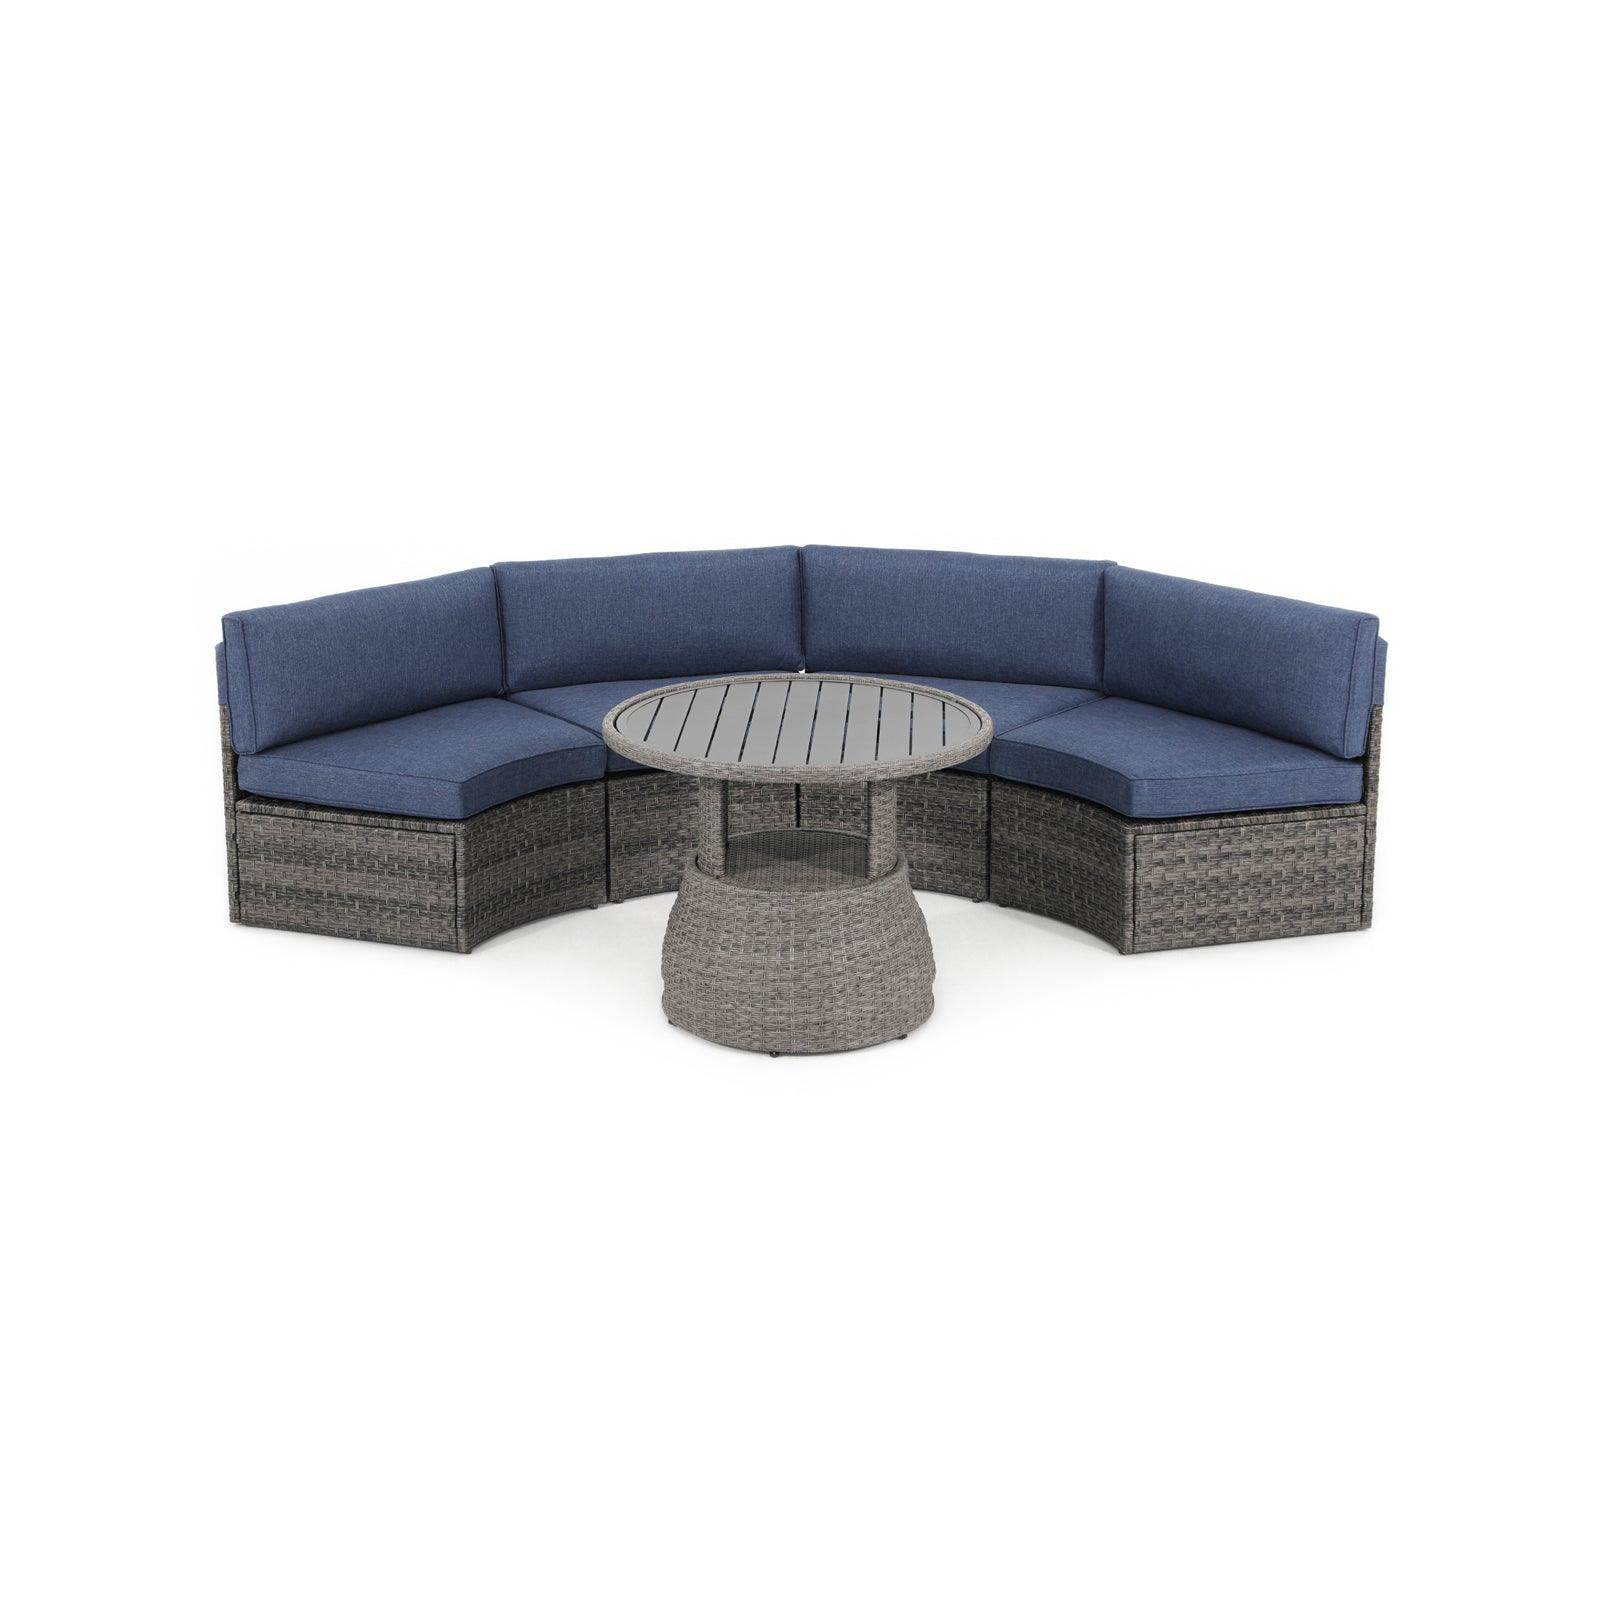 Boboli 4-seater Grey Outdoor Wicker Curved Sectional sofas with navy blue cushions + 1 Lift-top grey wicker round table - Jardina Furniture#color_Navy Blue#piece_5-pc.